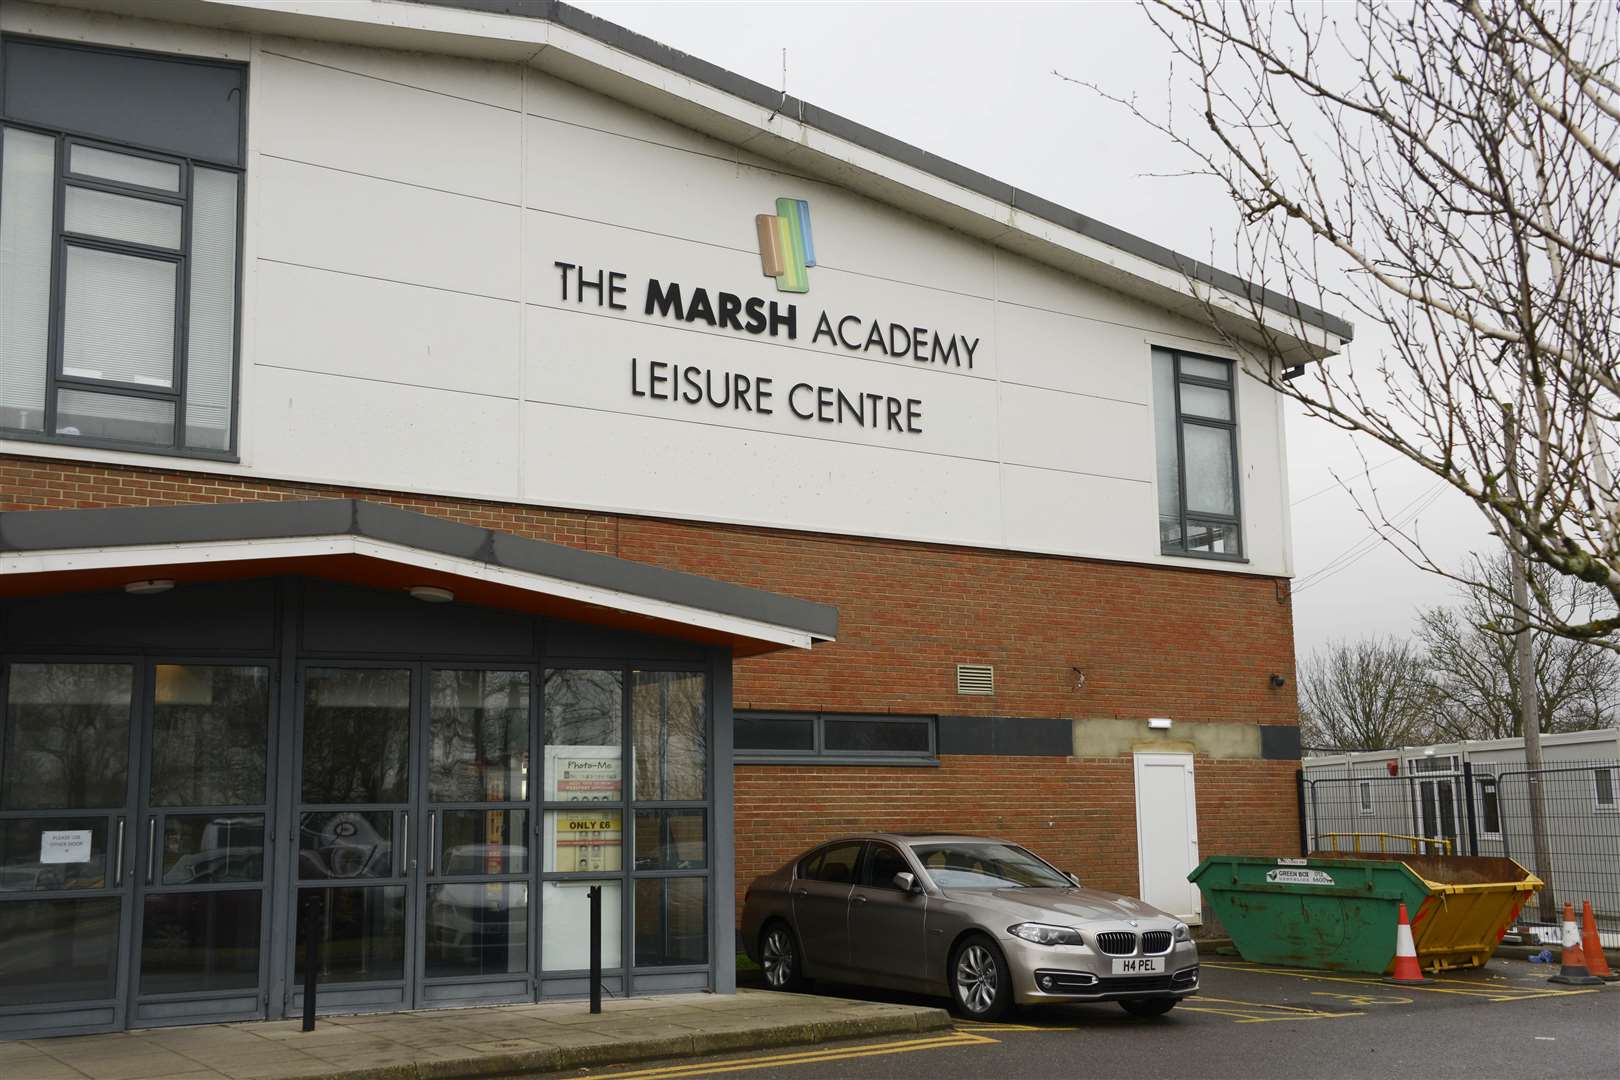 It is based at the Marsh Academy's leisure centre. Picture: Paul Amos